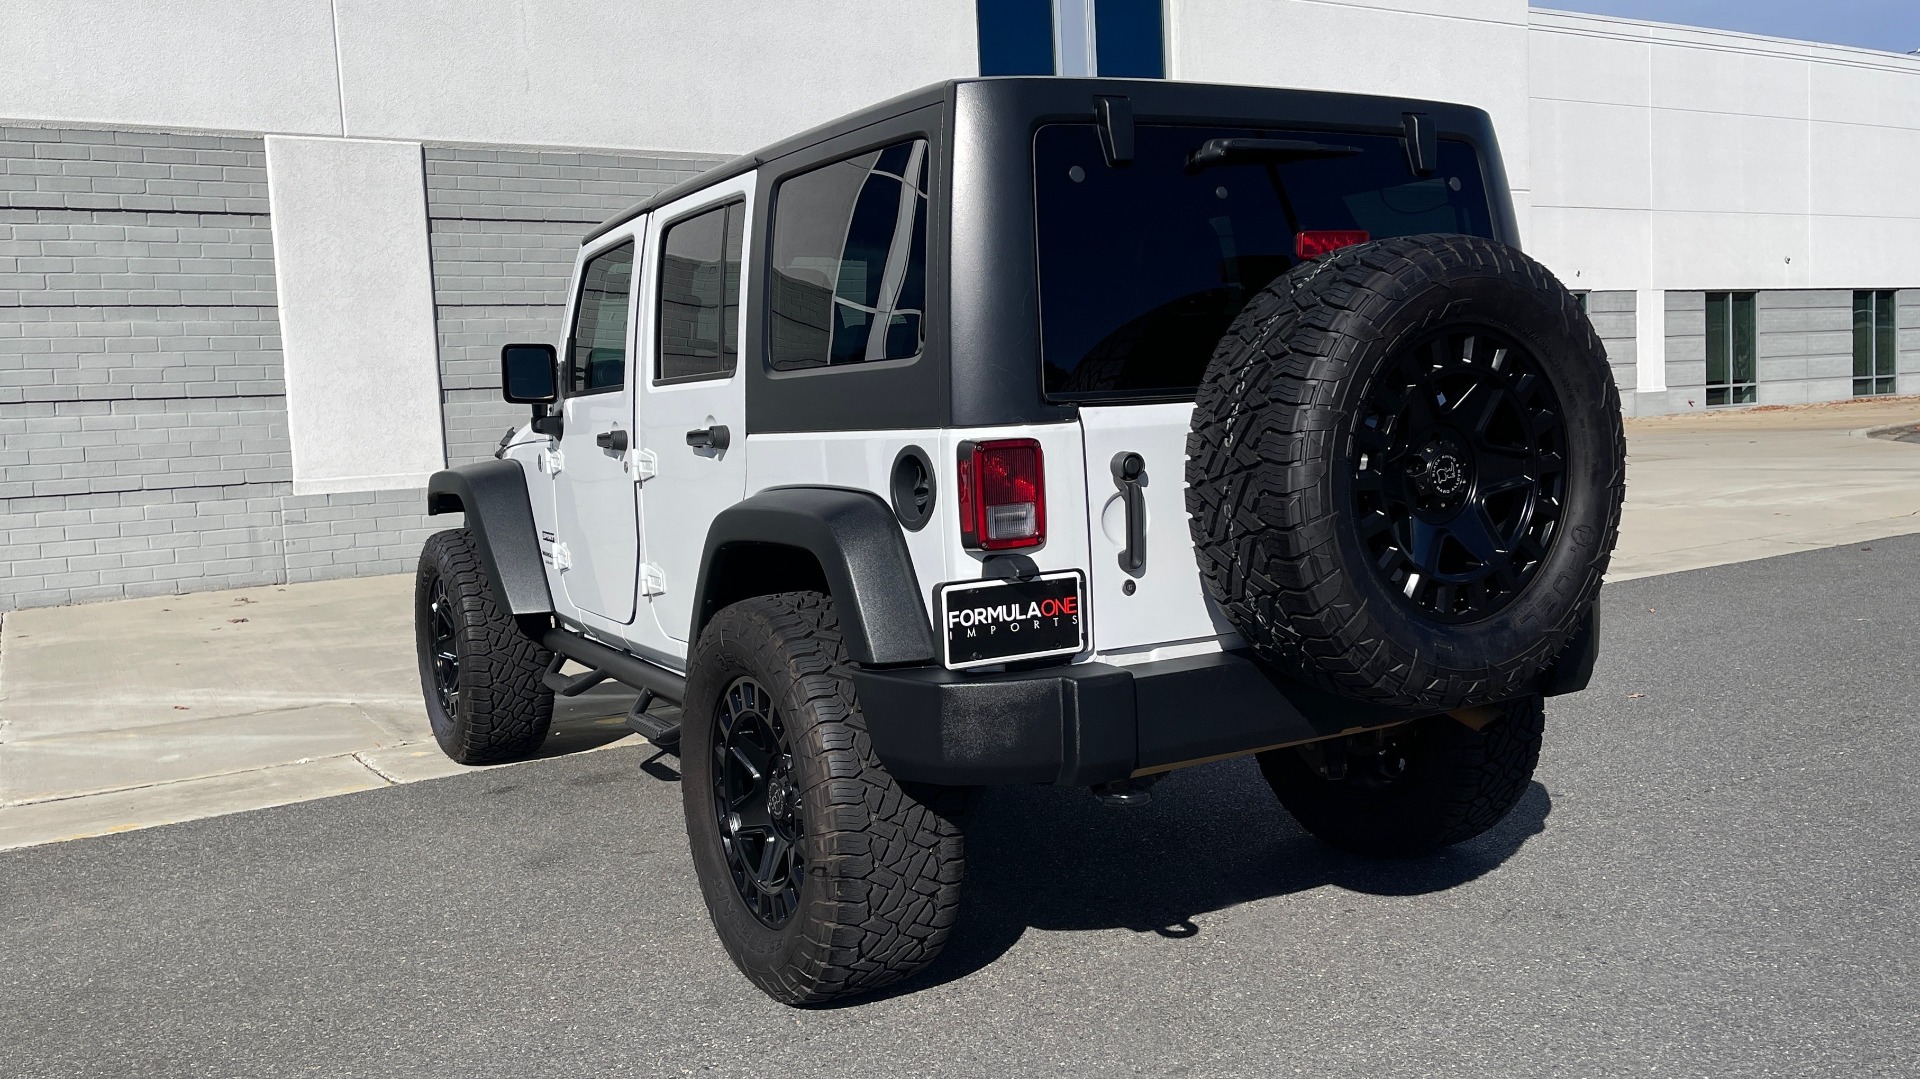 Used 2018 Jeep WRANGLER JK UNLIMITED SPORT S 4X4 / 3.6L V6 / AUTO / HARD-TOP / 20IN WHEELS for sale Sold at Formula Imports in Charlotte NC 28227 6